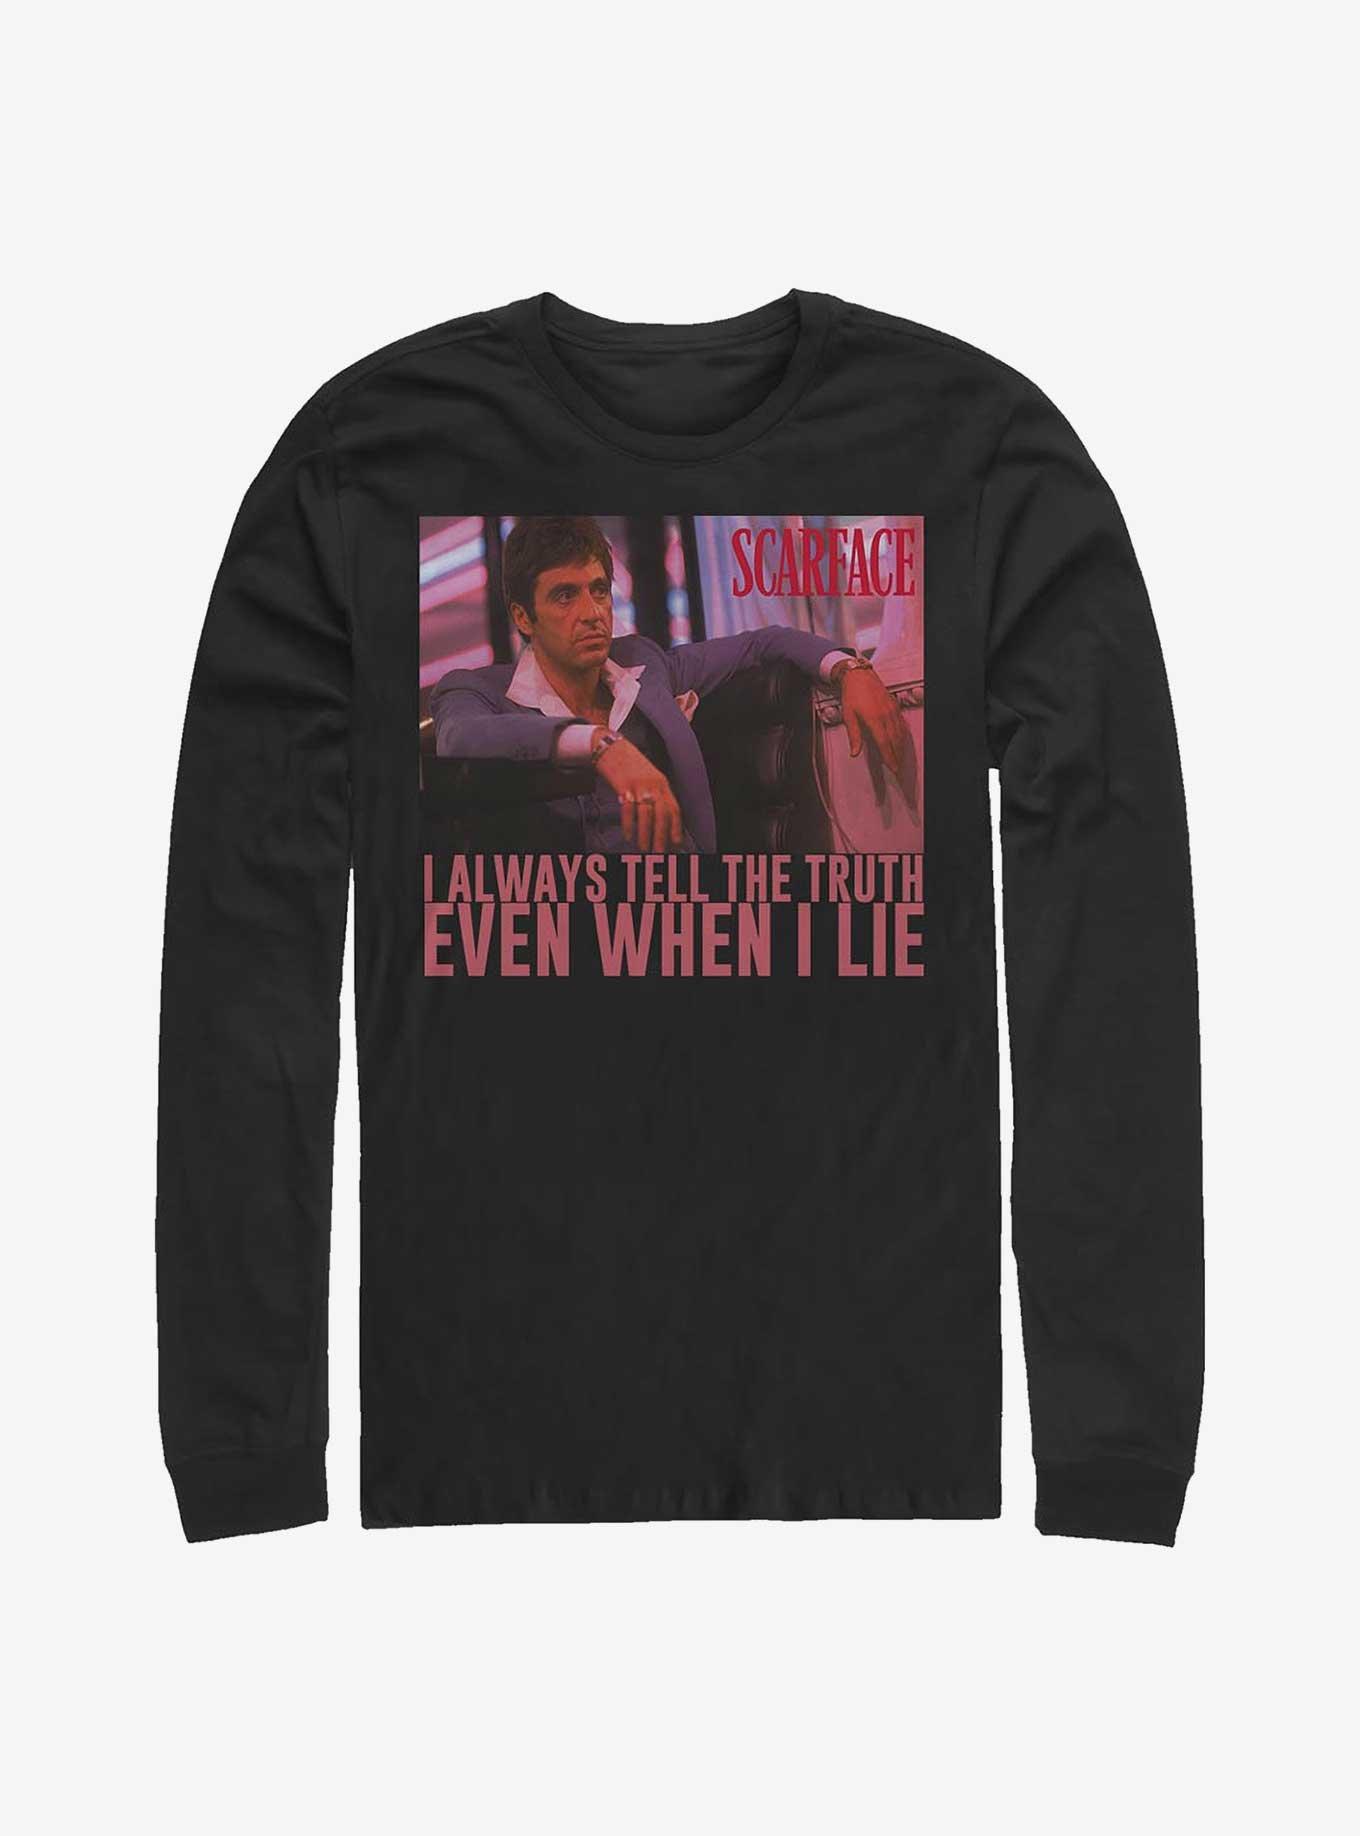 Scarface Always Tell The Truth Even When I Lie Long-Sleeve T-Shirt